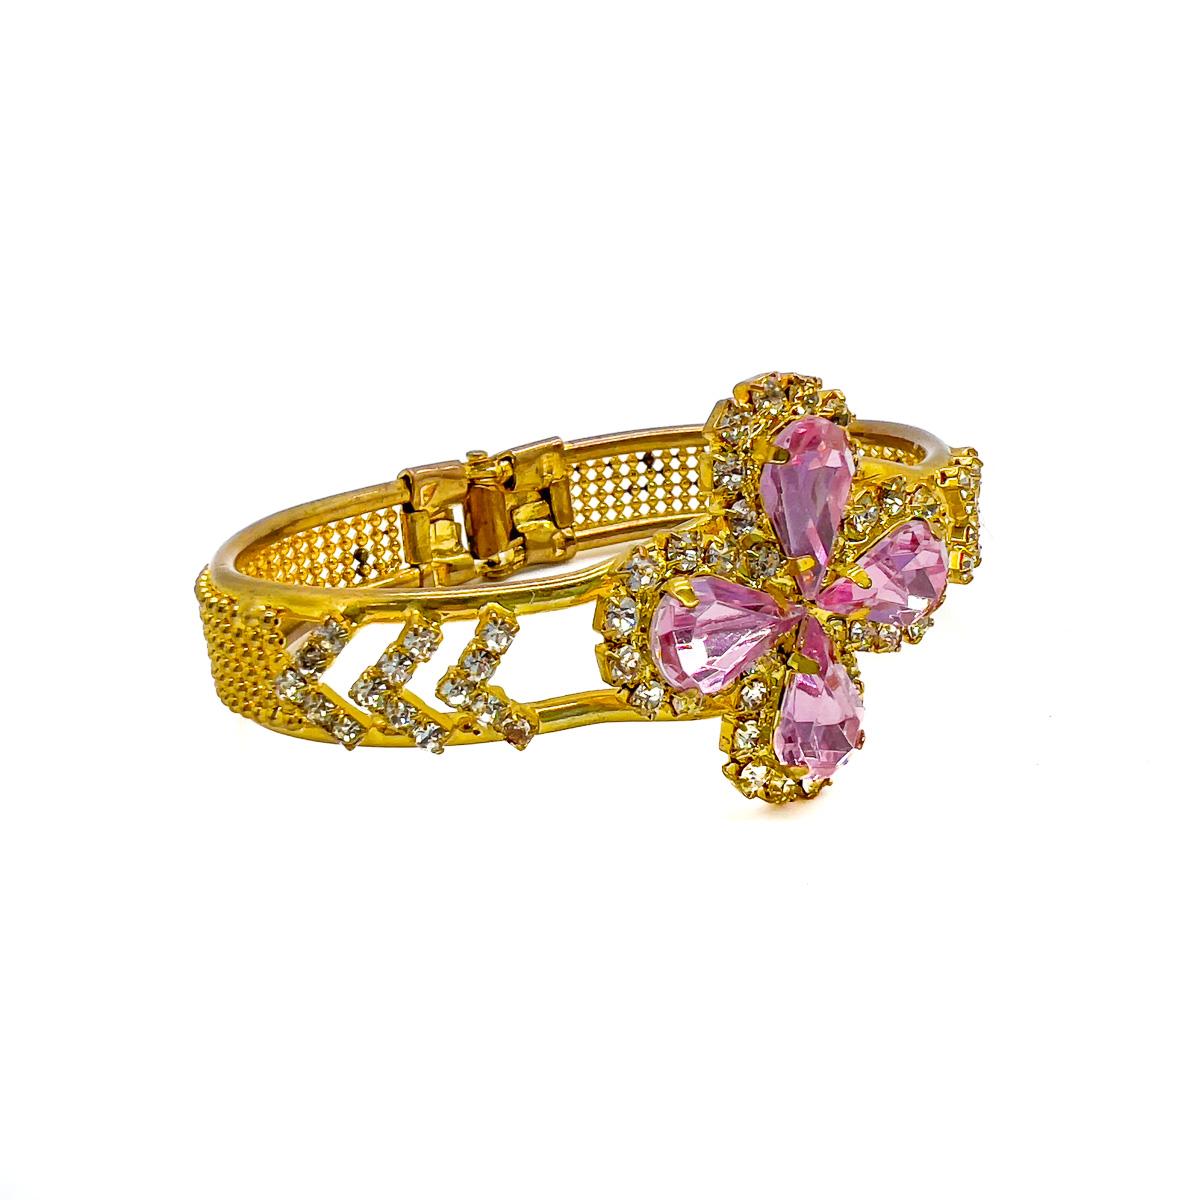 A dreamy Vintage Victorian Pink Crystal Cuff. Inspired by the bangles worn by Victorian women in the late 1800s this bracelet is no pale imitation. The golden metalwork flaunts the detail of an original and the delicate pale pink teardrop stones a